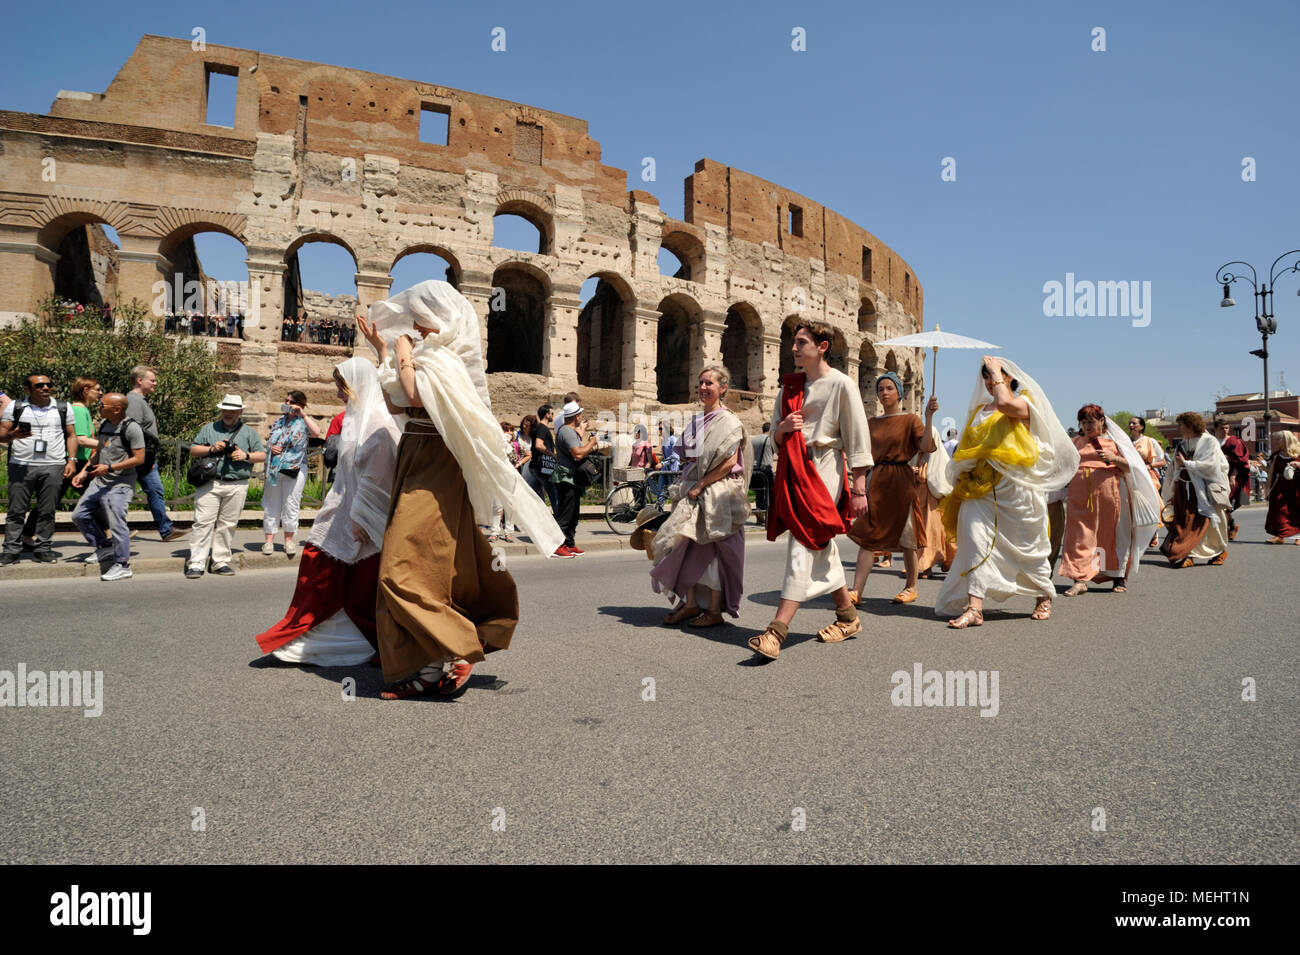 Rome, Italy. 22nd April, 2018. Natale di Roma in Rome, Italy. Rome celebrates the 2771st anniversary of the foundation of the city in 21st April 753 B.C. Historical parade in the streets of Rome. People are dressed in ancient roman costumes. Credit: Vito Arcomano/Alamy Live News Stock Photo